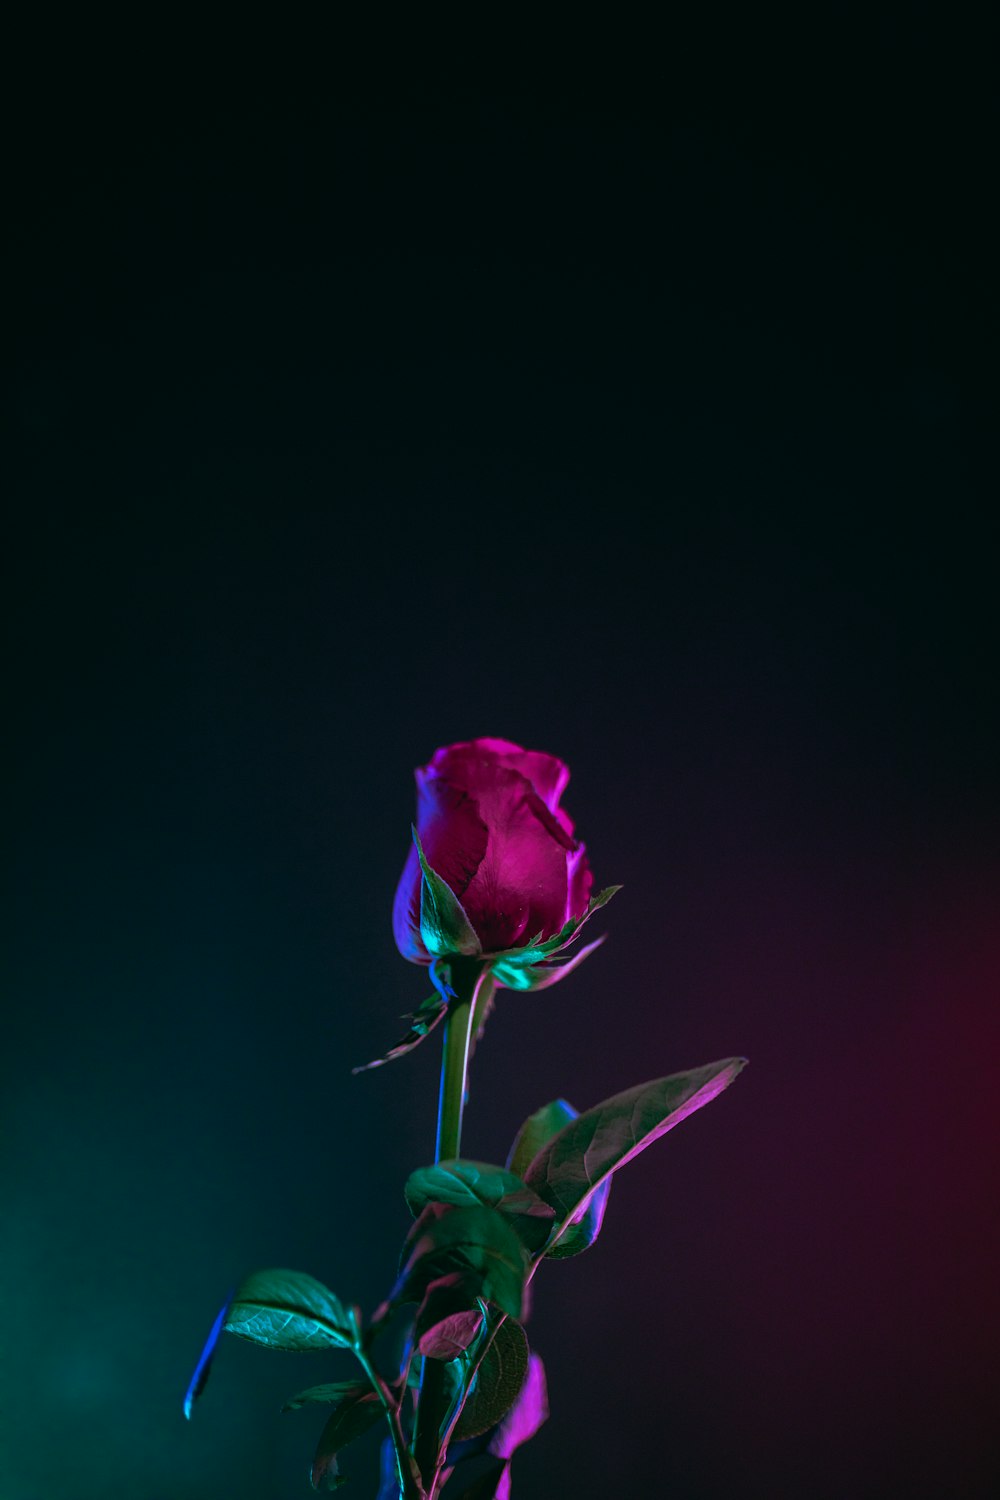 350+ Love Rose Pictures | Download Free Images & Stock Photos on Unsplash